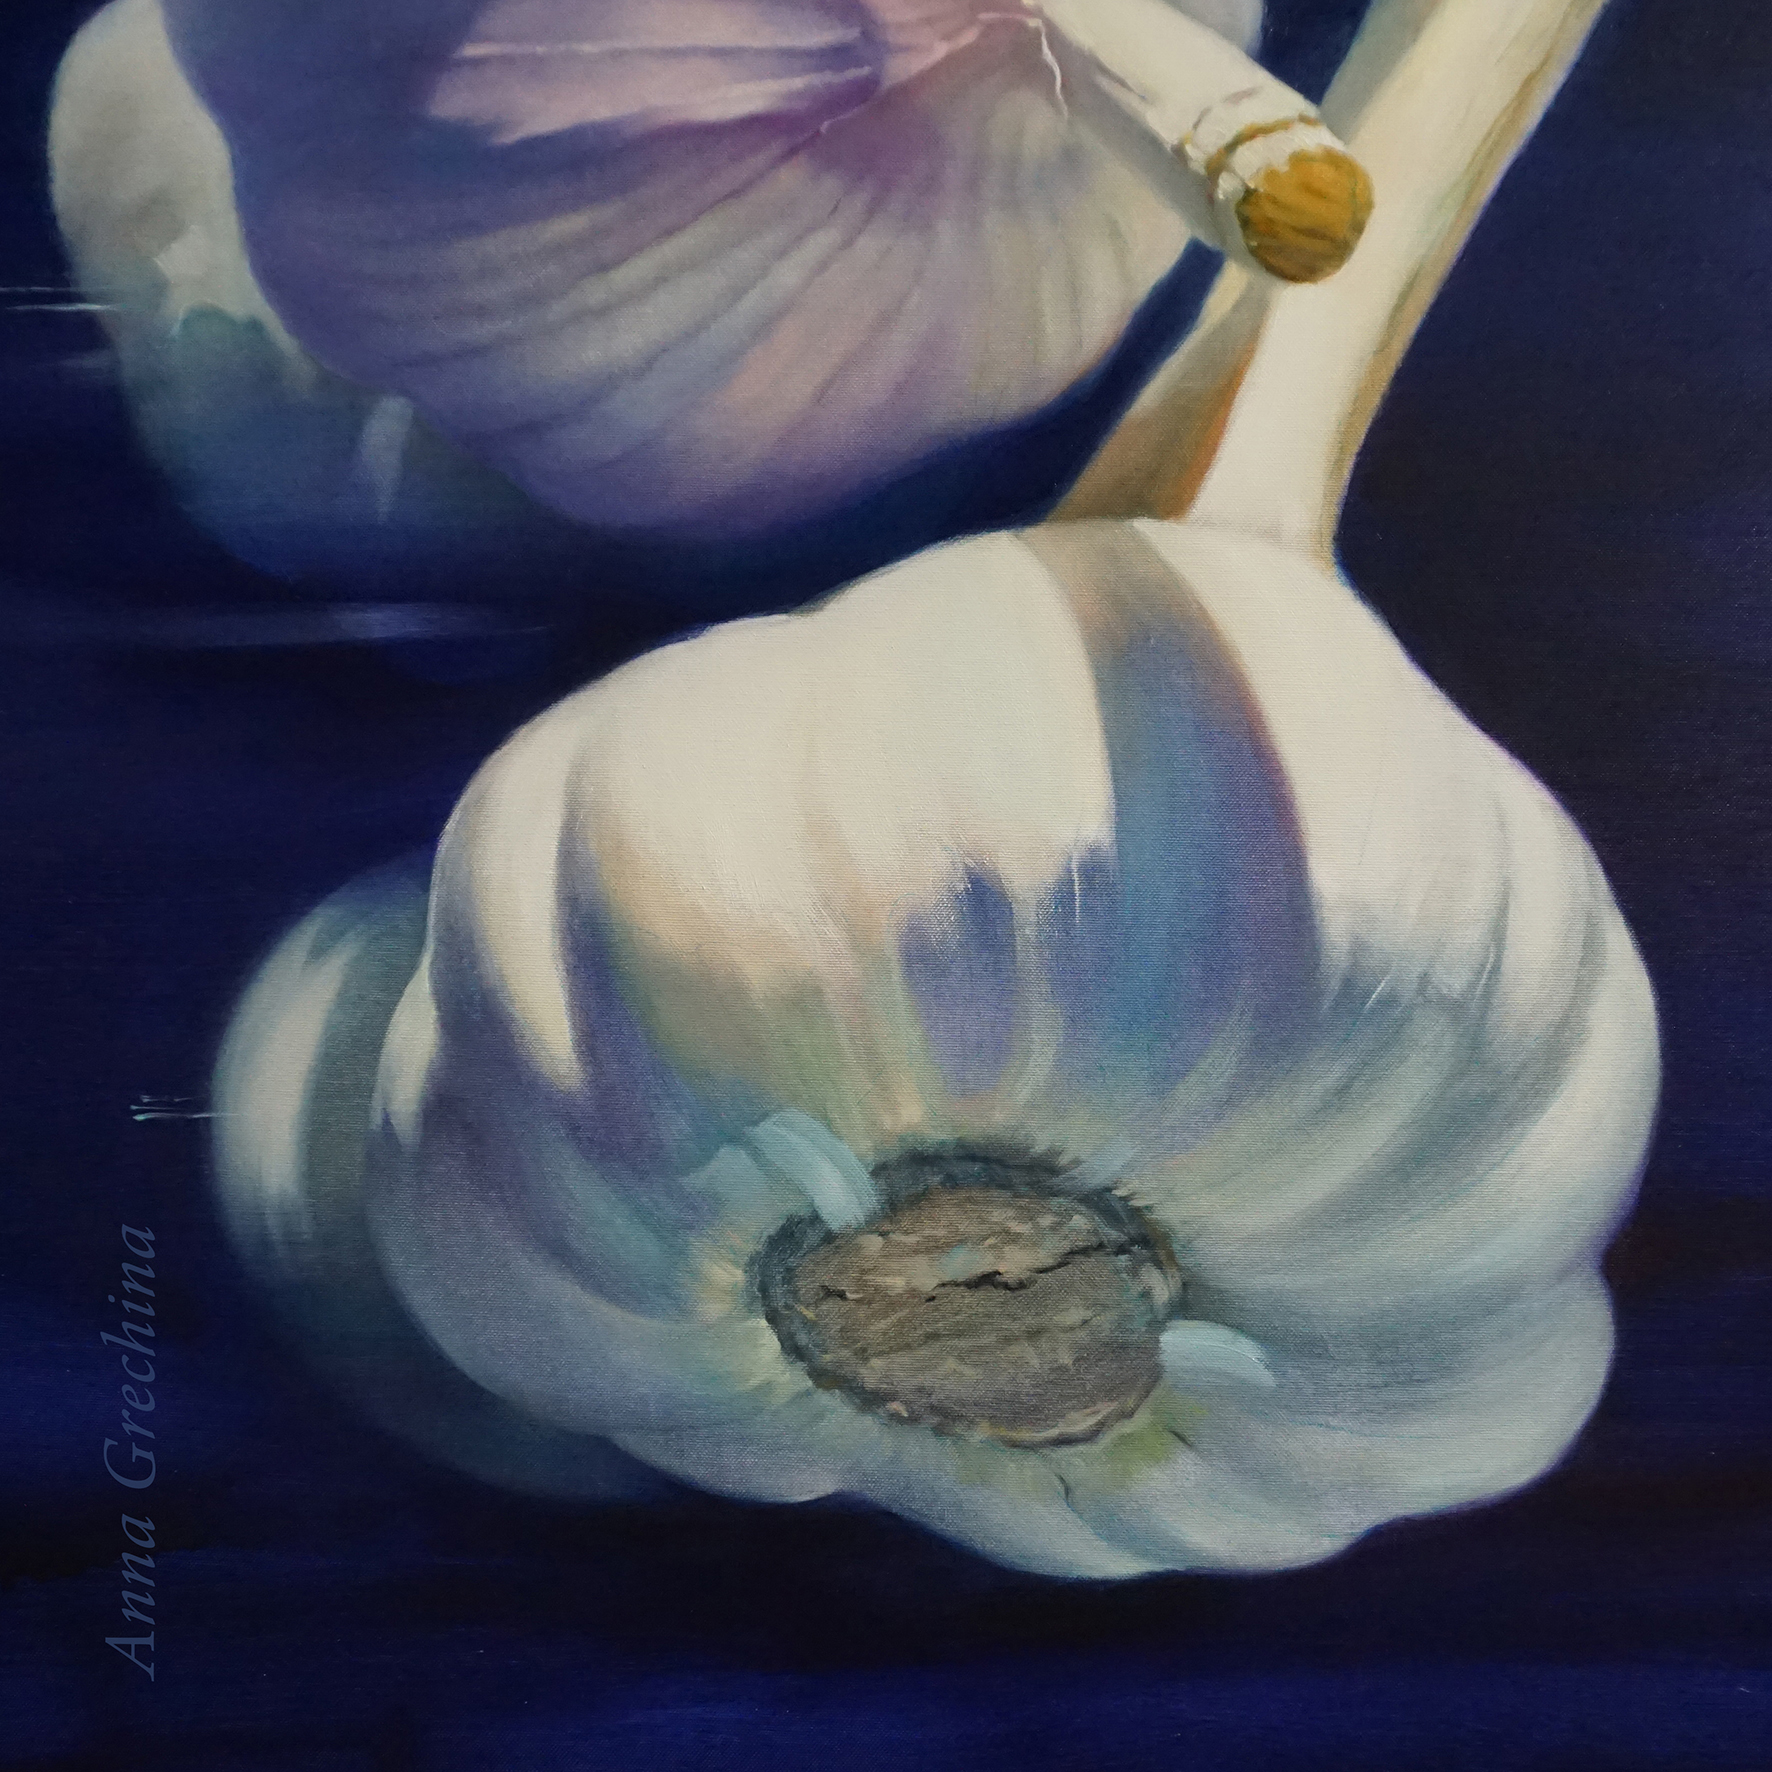 "Family in the Universe". Still life with garlic, hyperrealism, painting. Artist Anna Grechina.